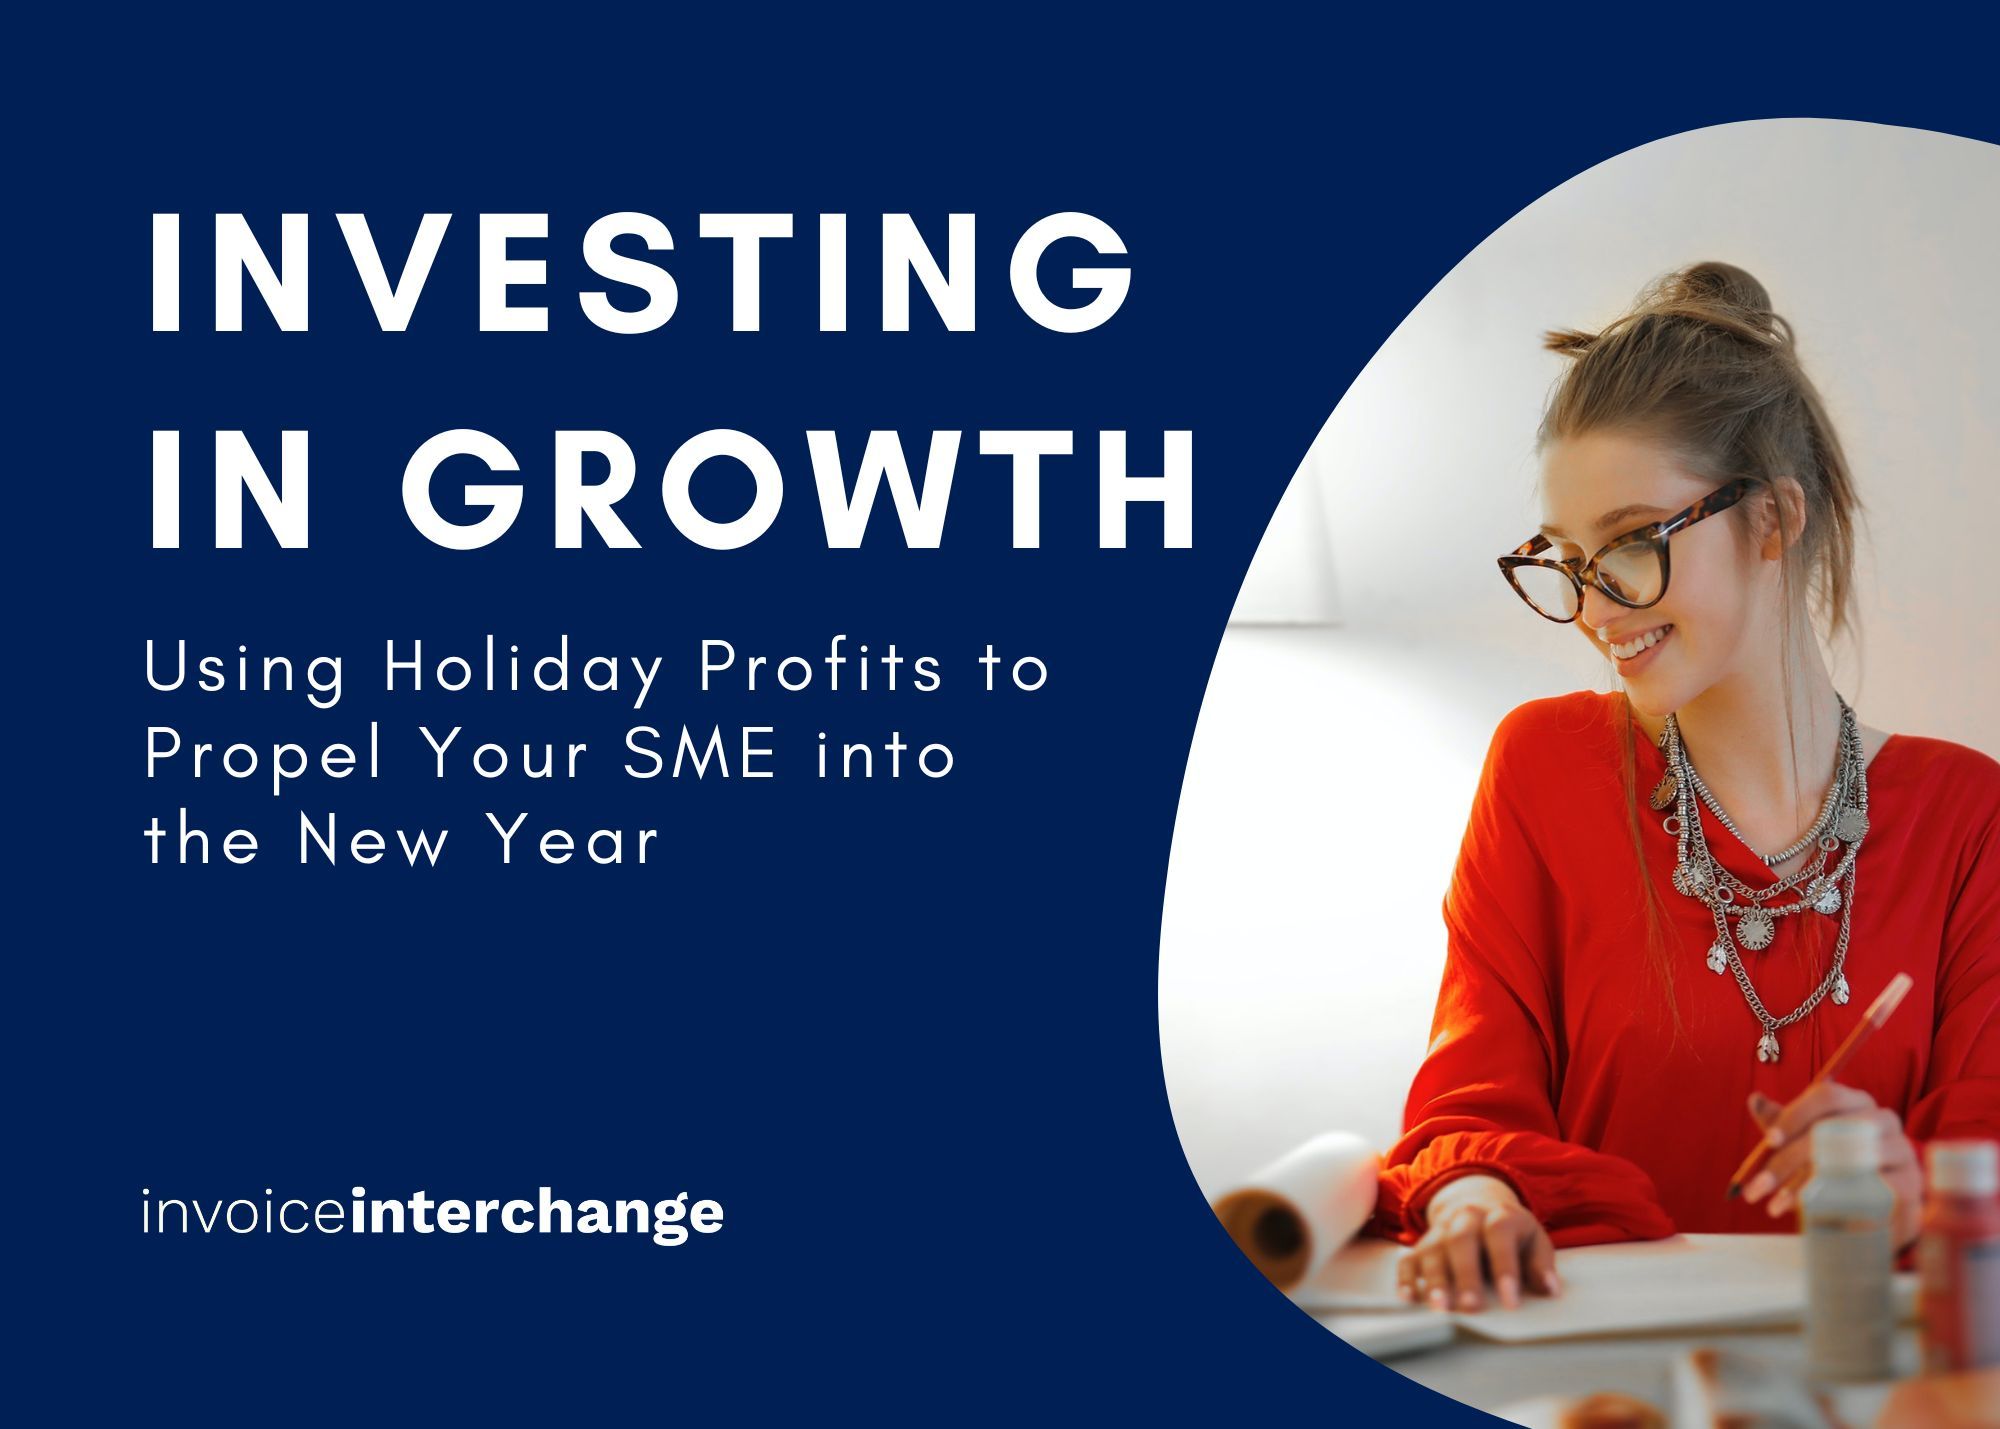 Investing in Growth: Using Holiday Profits to Propel Your SME into the New Year